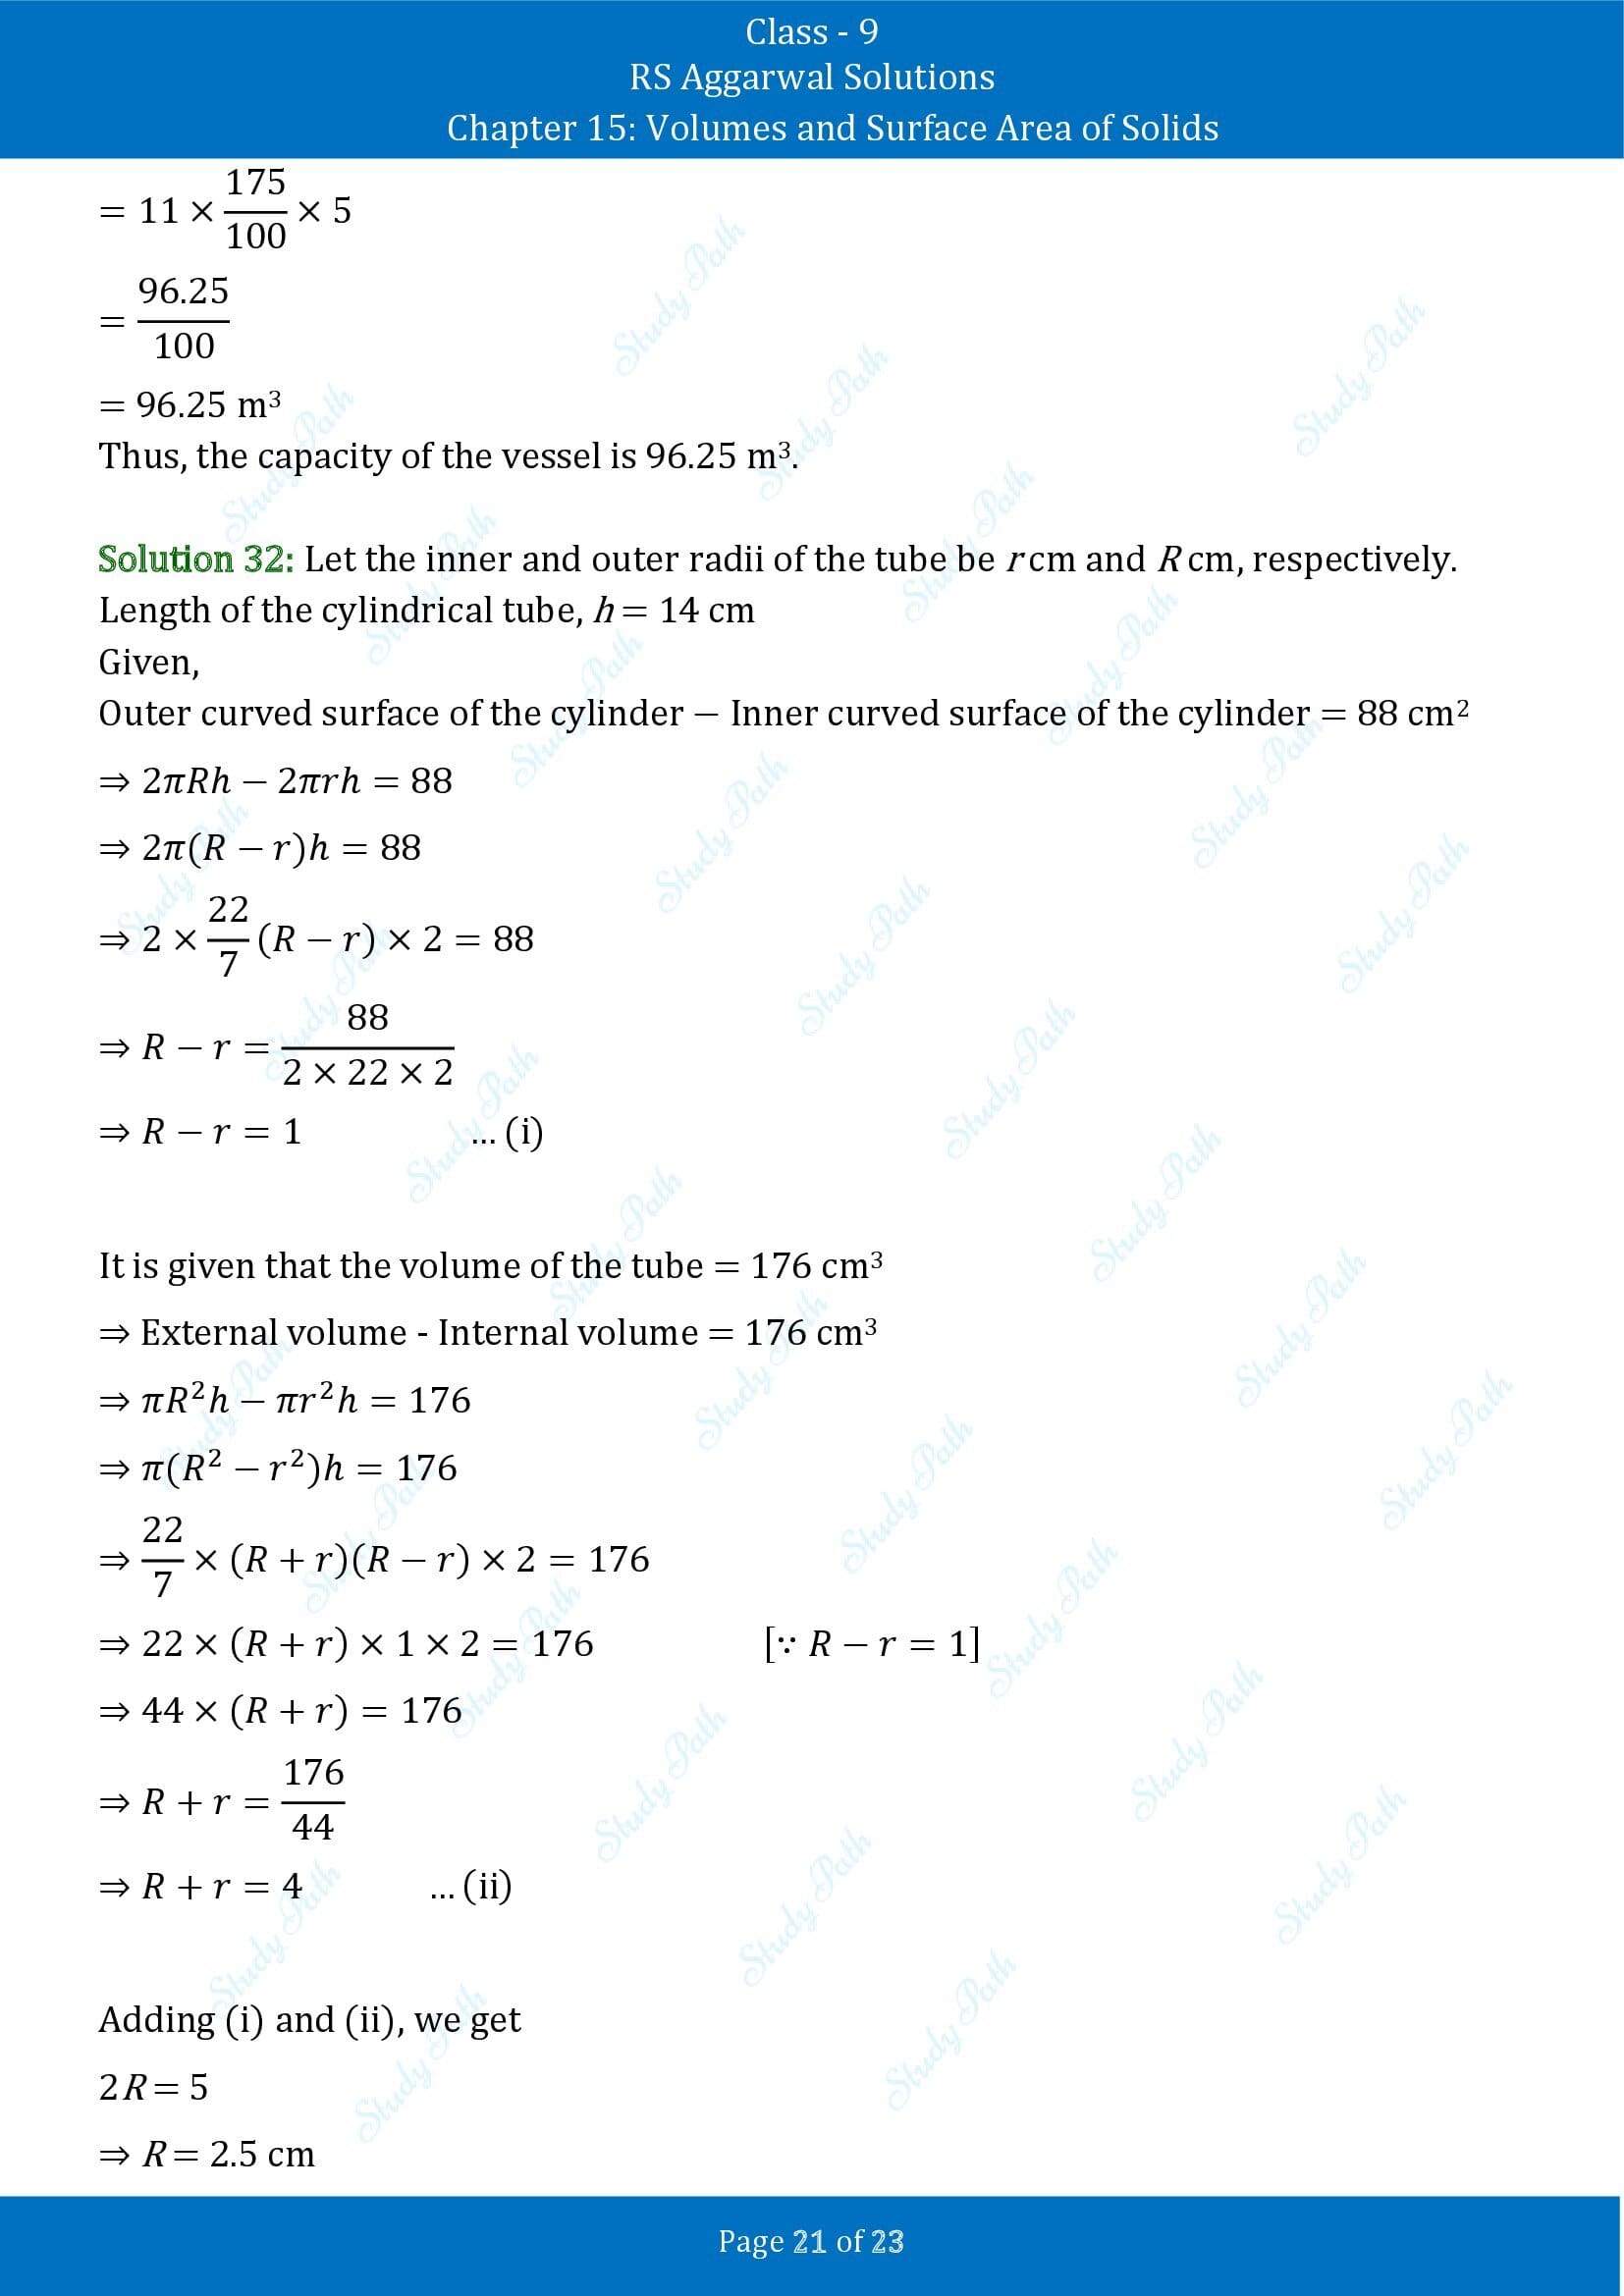 RS Aggarwal Solutions Class 9 Chapter 15 Volumes and Surface Area of Solids Exercise 15B 00021